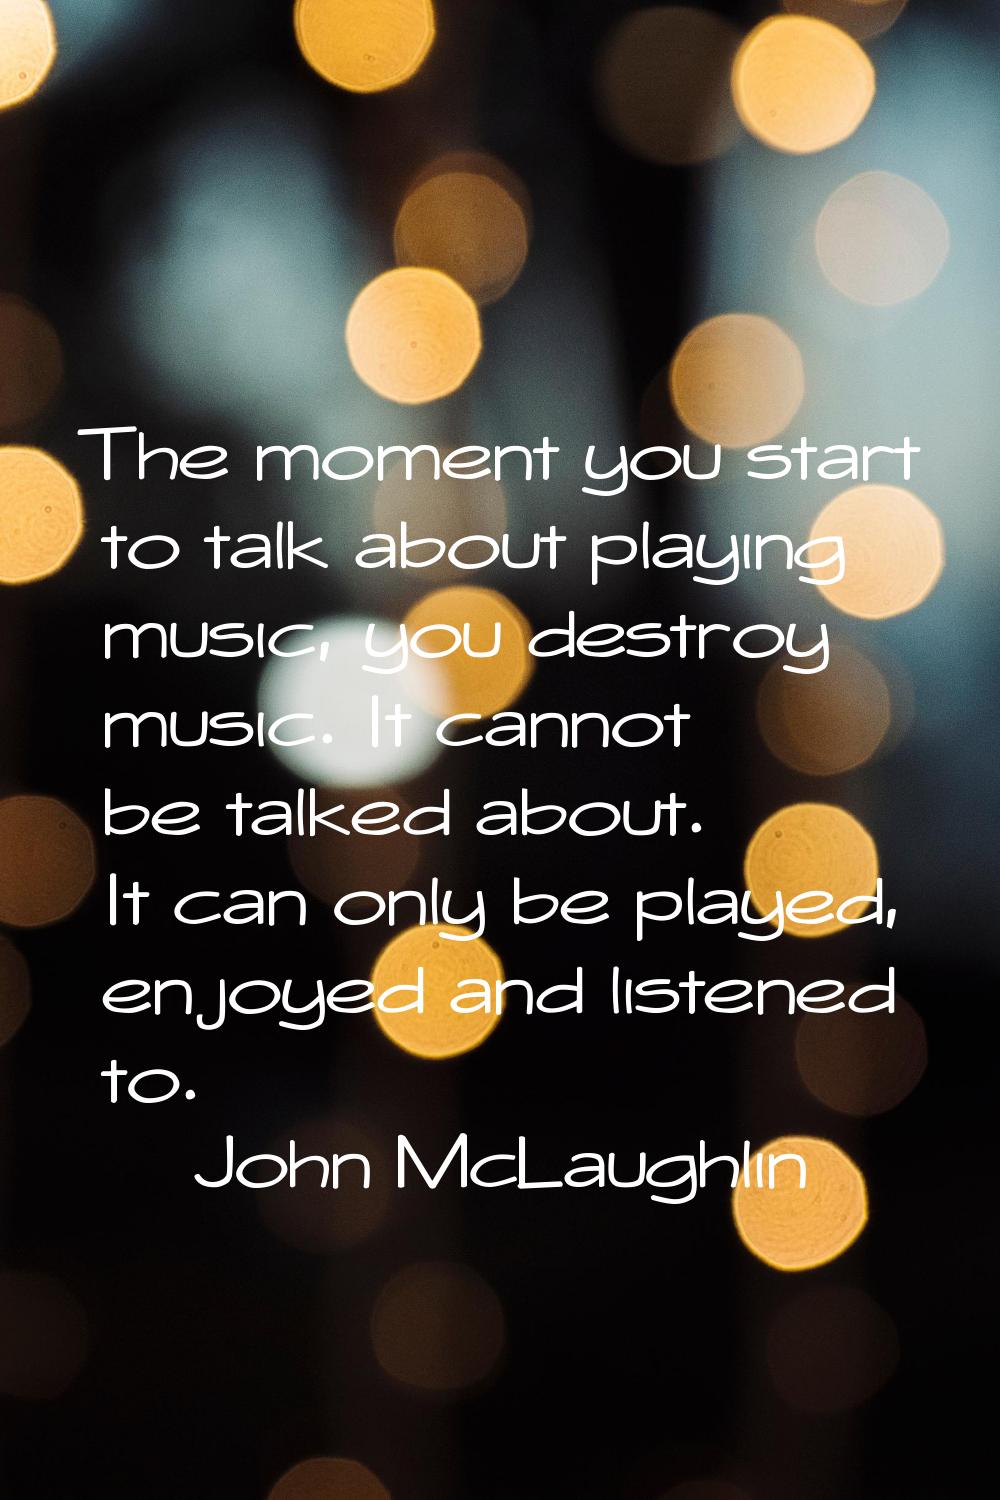 The moment you start to talk about playing music, you destroy music. It cannot be talked about. It 